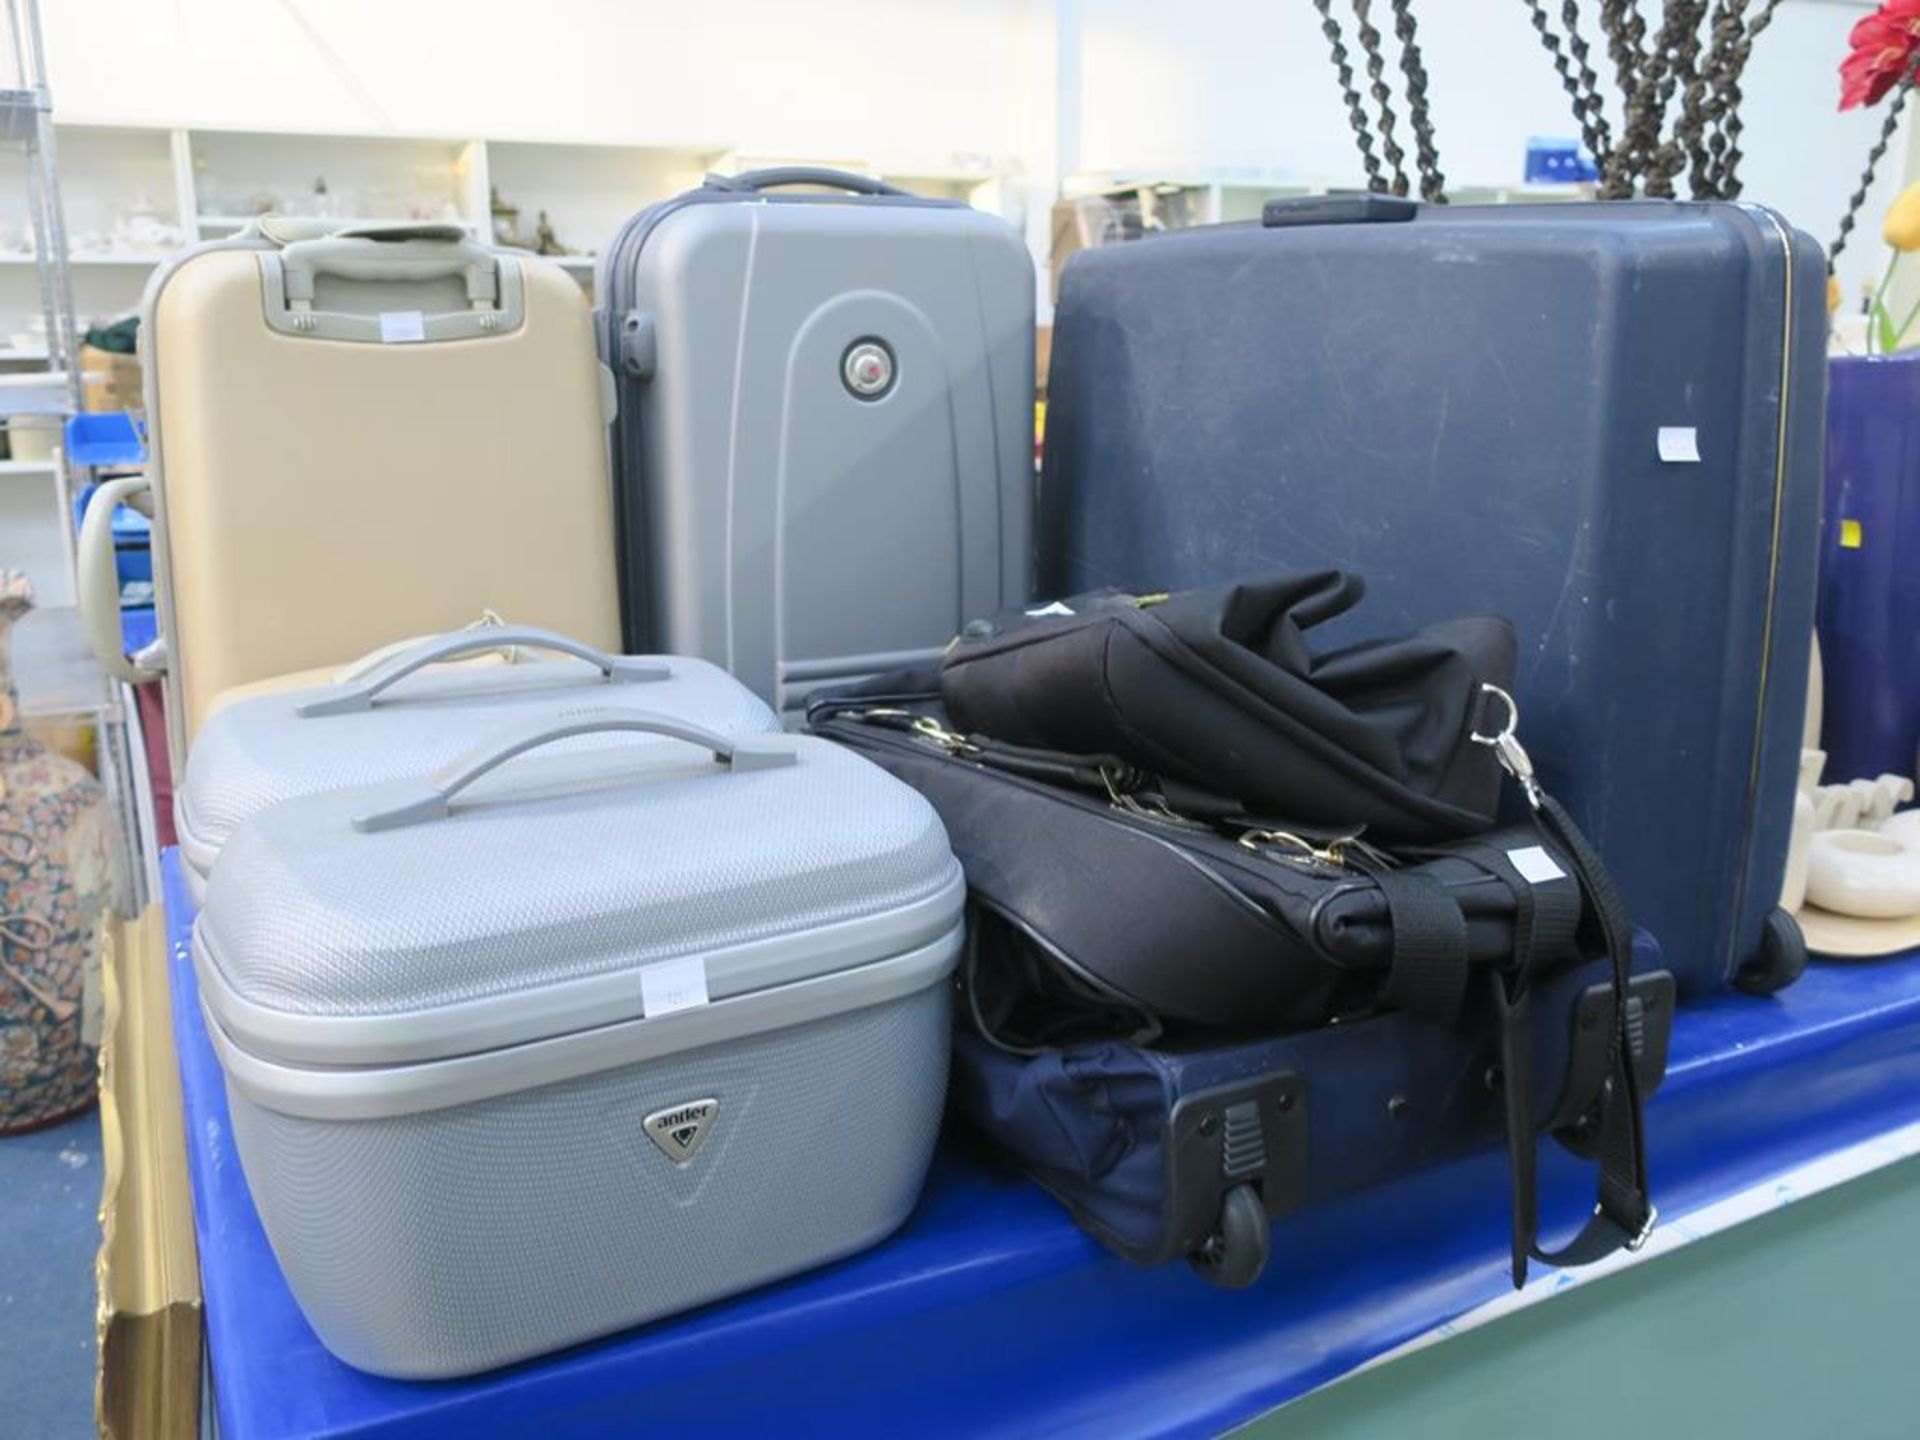 A selection of Suitcases and Luggage Bags (est £20-£40)